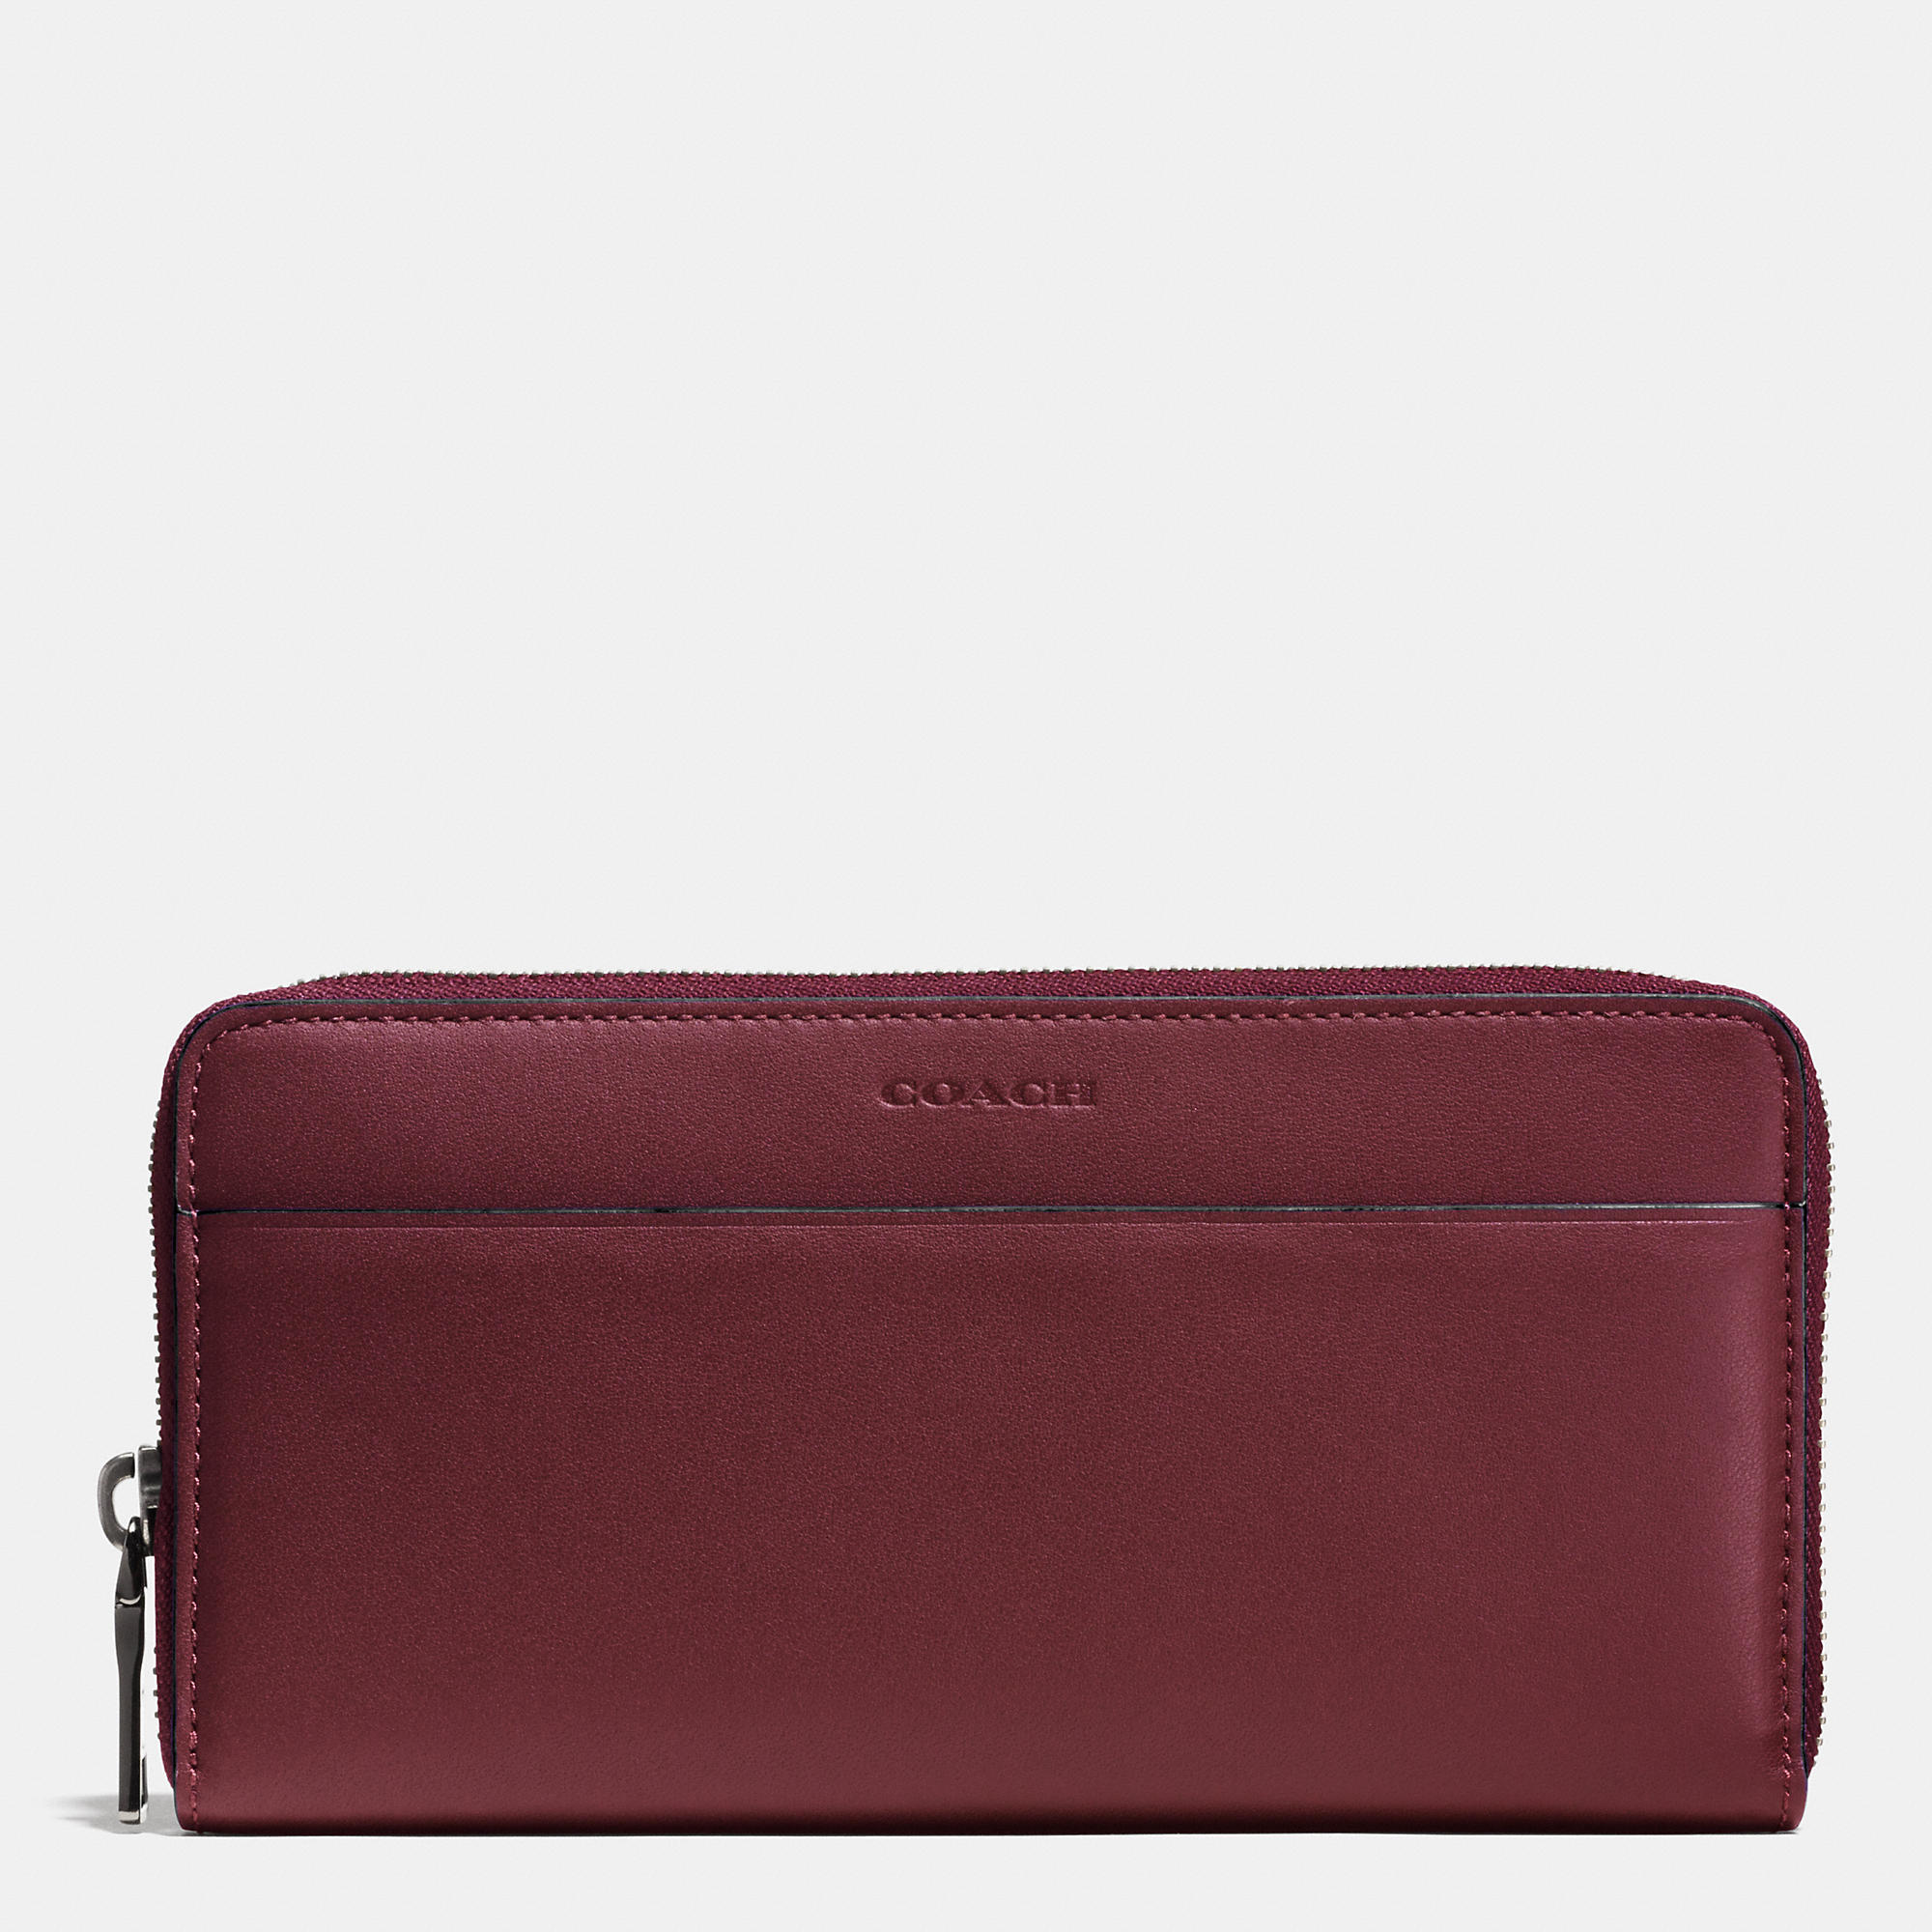 Fashion Women Real Coach Accordion Zip Wallet In Glovetanned Leather | Coach Outlet Canada